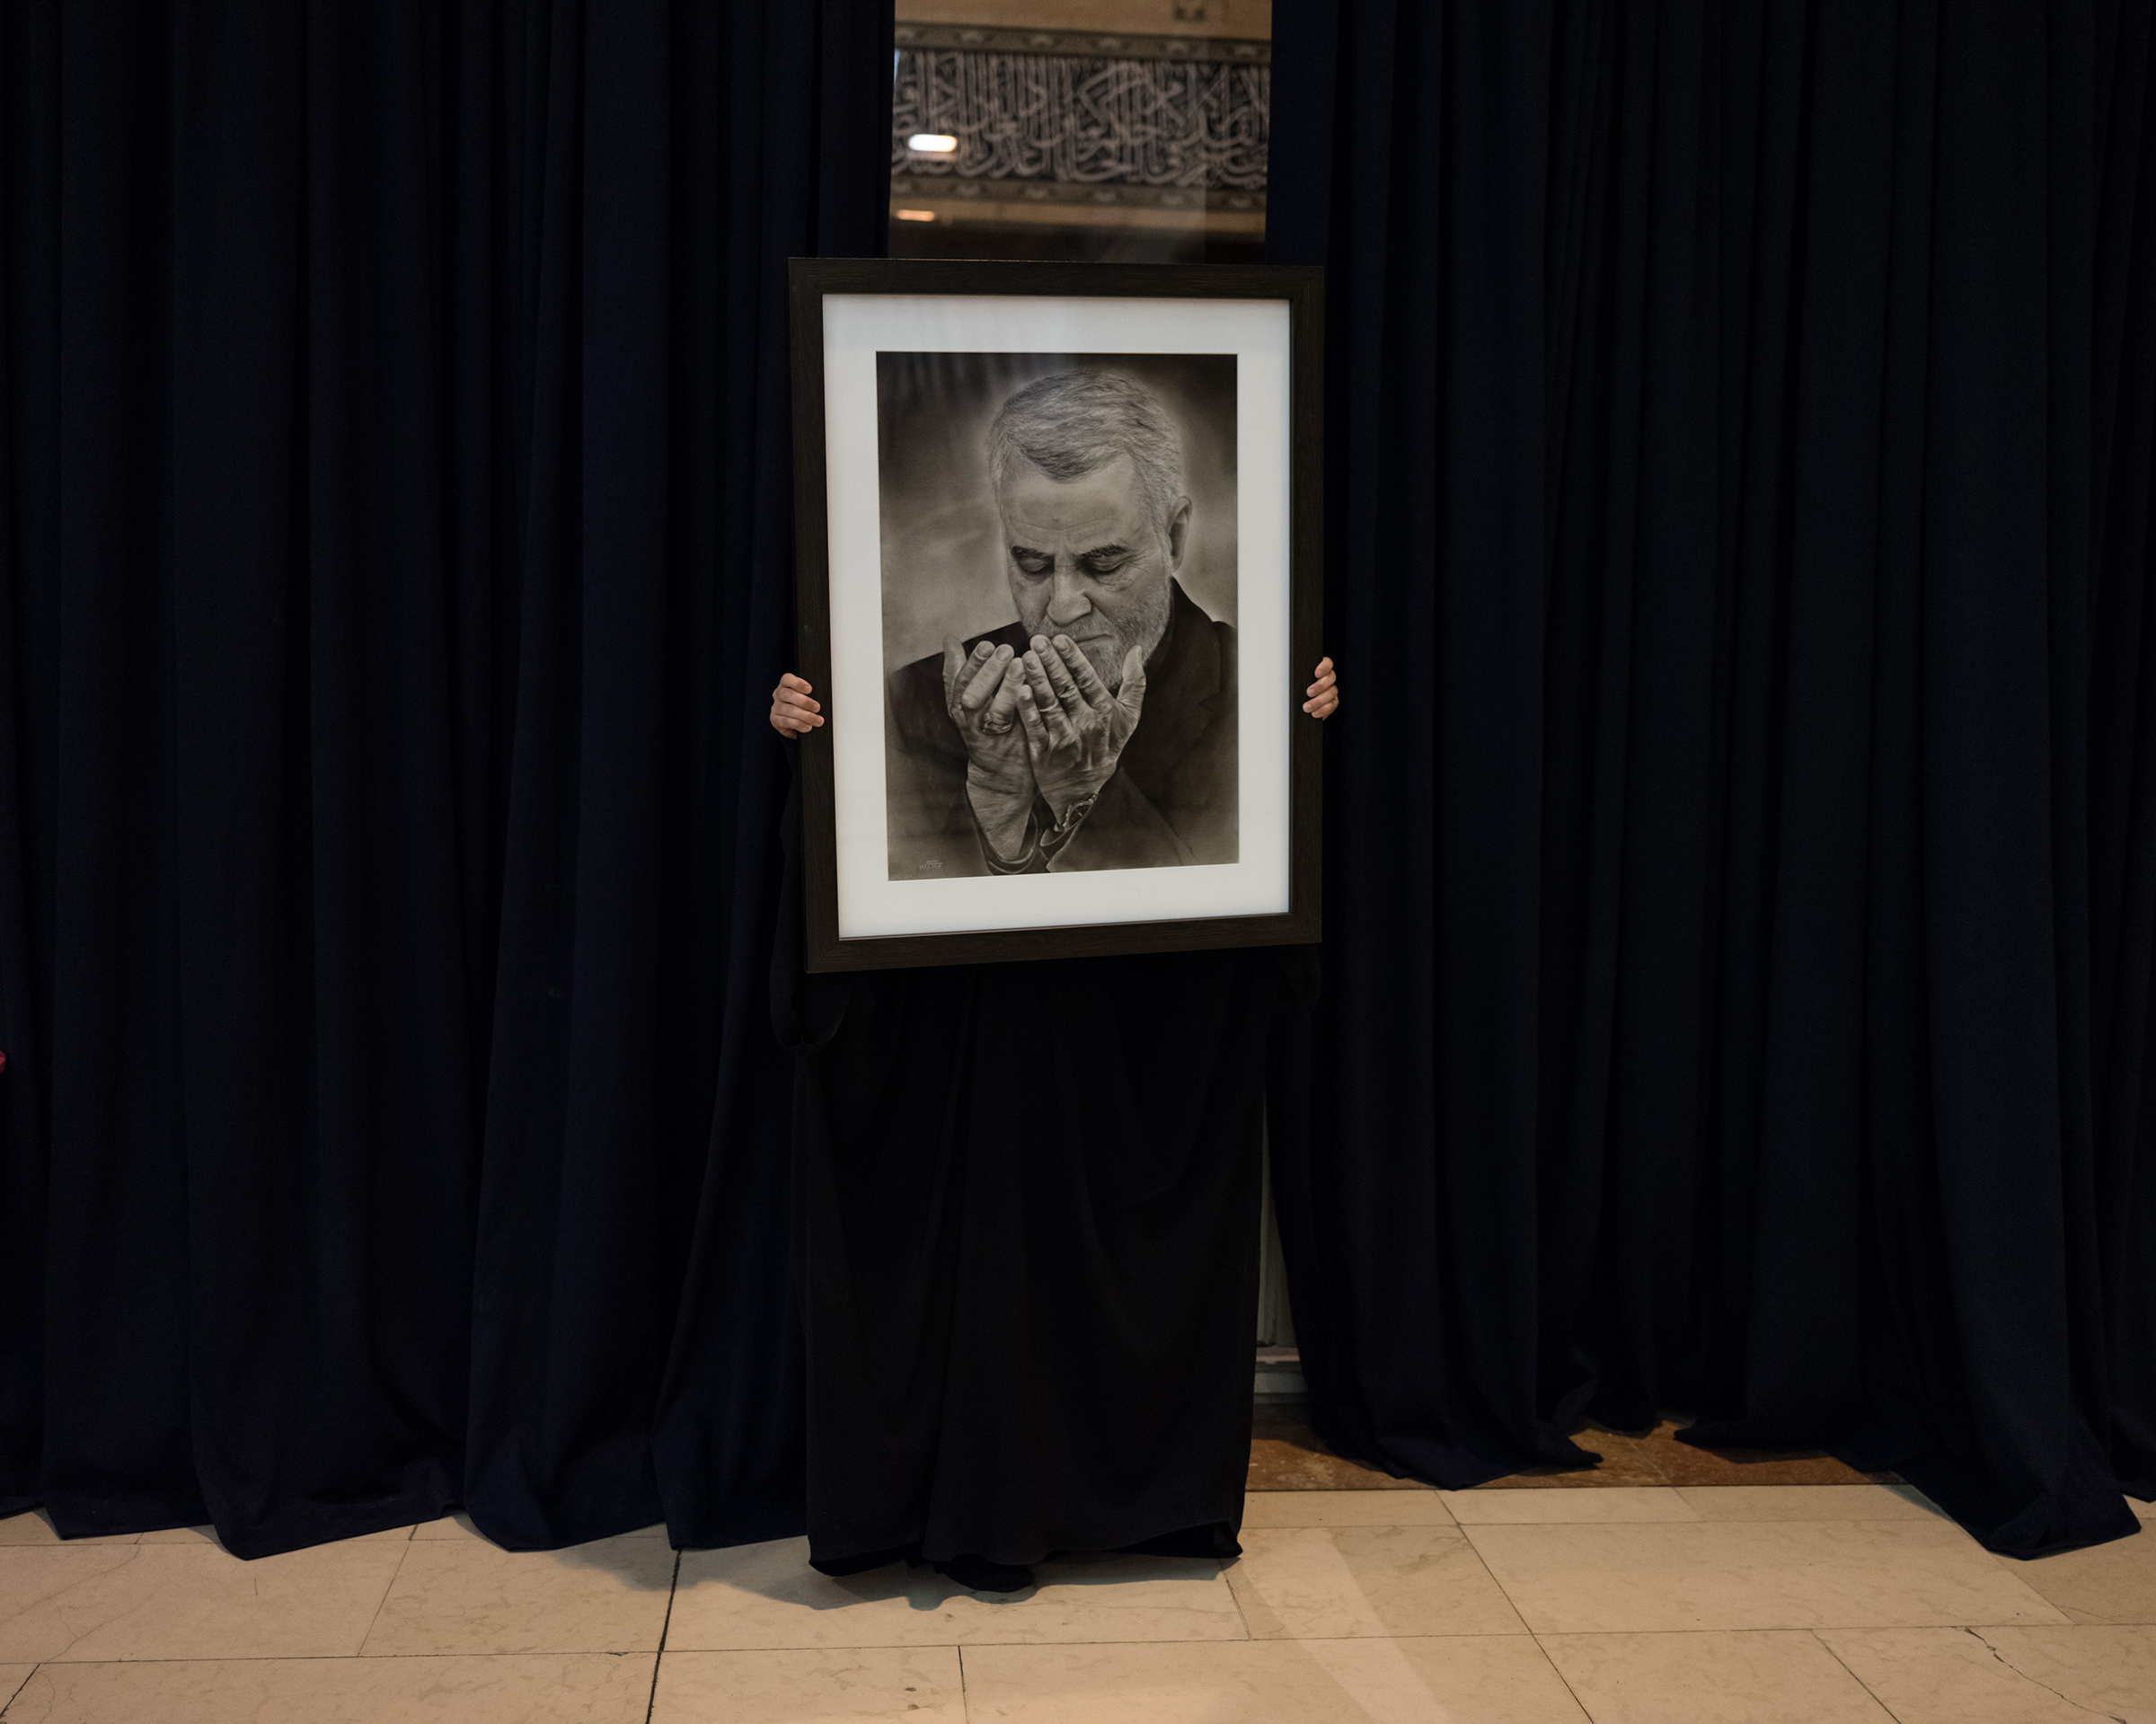 A portrait of Soleimani is held during the three official days of mourning. (Newsha Tavakolian—Magnum Photos for TIME)